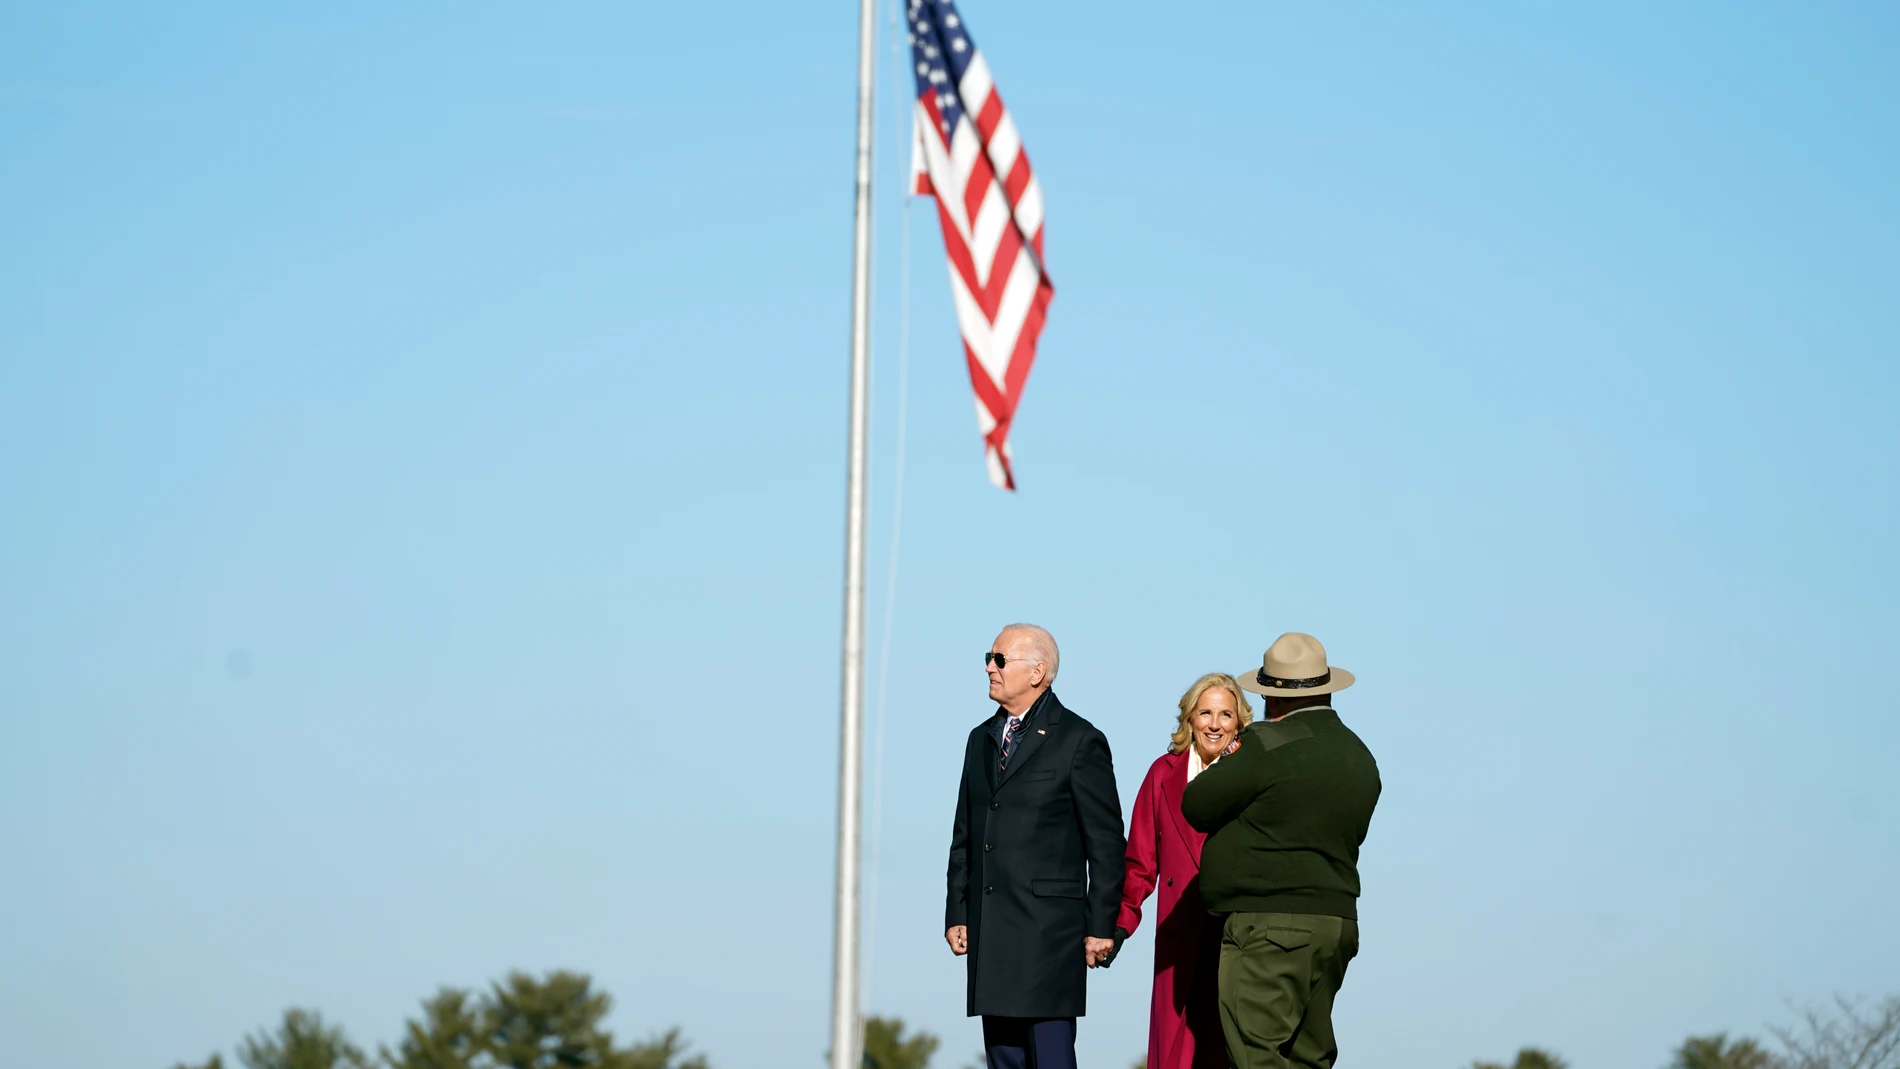 President Joe Biden and first lady Jill Biden participate in a memorial wreath ceremony at the National Memorial Arch at Valley Forge National Historic Park in Valley Forge, Pa., Friday, Dec. 5, 2024. (AP Photo/Stephanie Scarbrough)